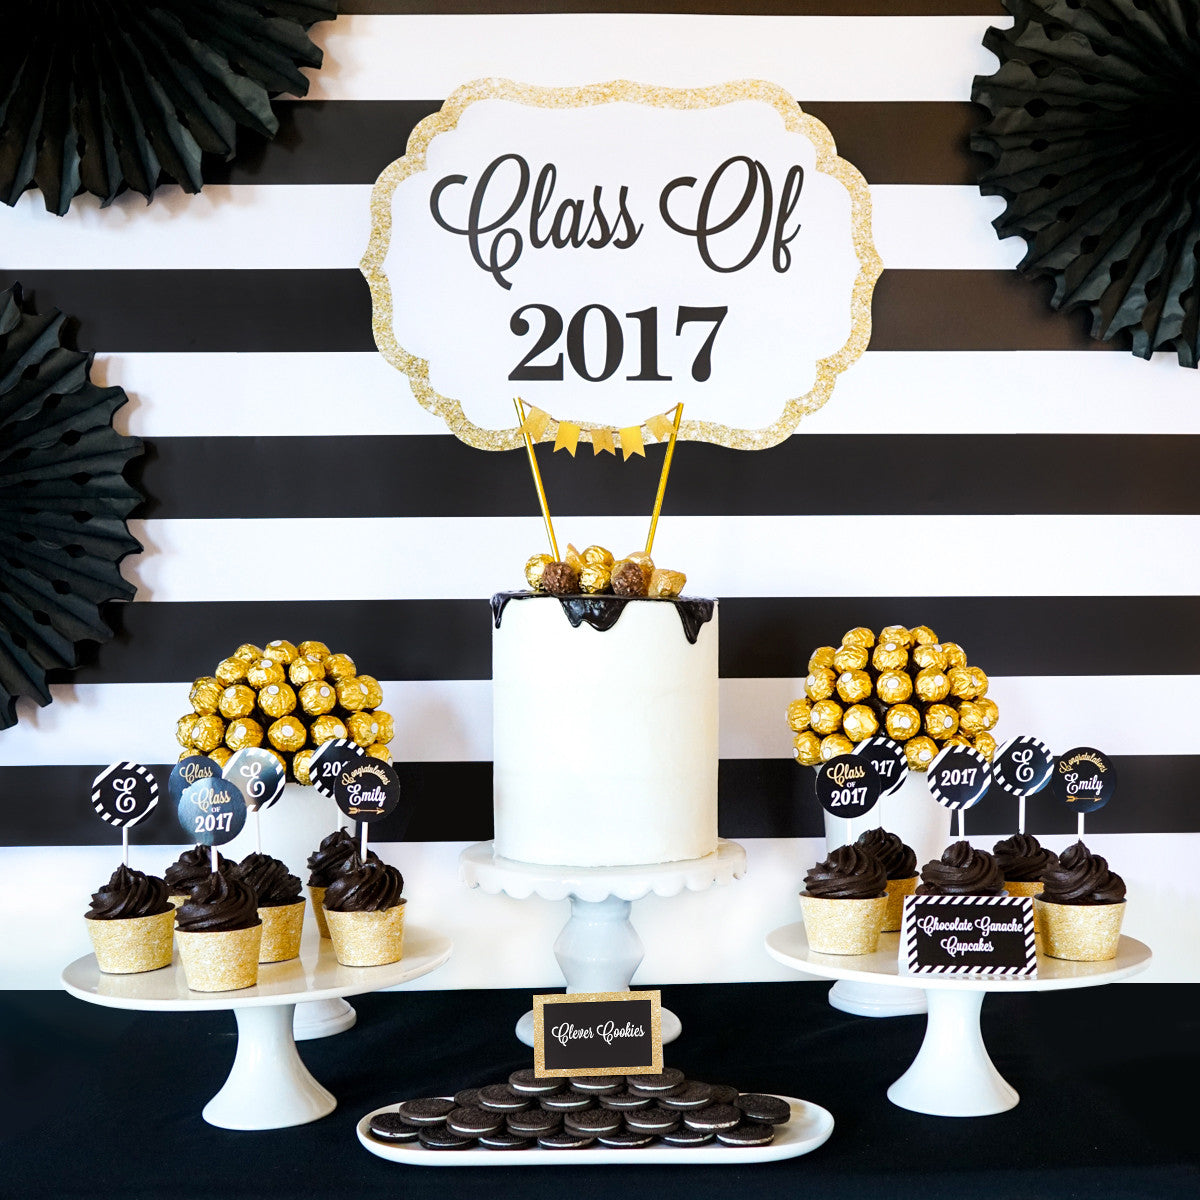 Graduation party set up - black, white and gold